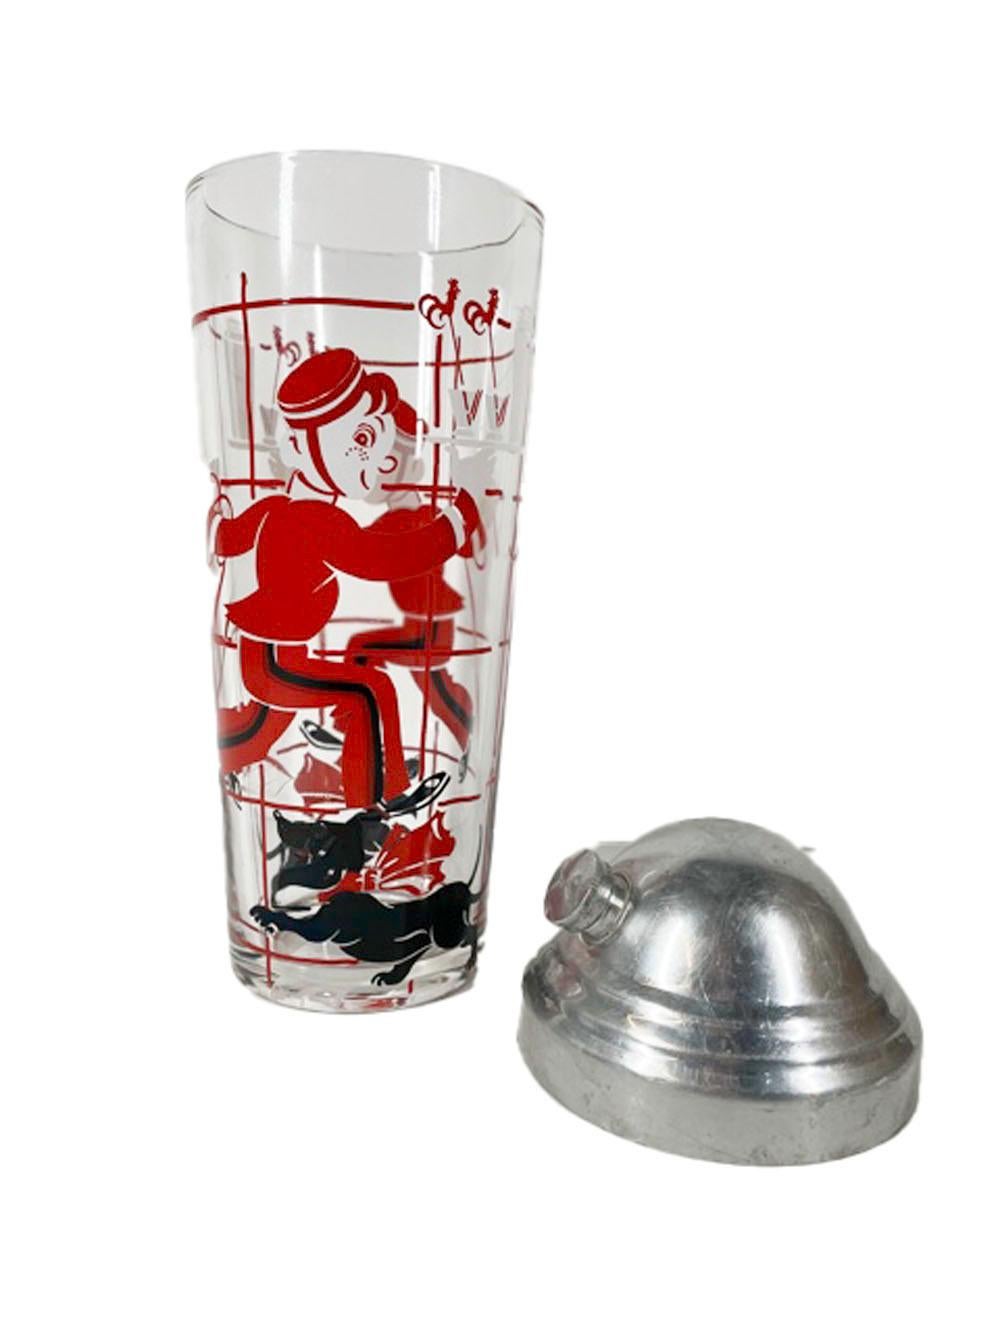 American Art Deco Cocktail Shaker Set, Bellhop Walking a Dachshund and Carrying Cocktails